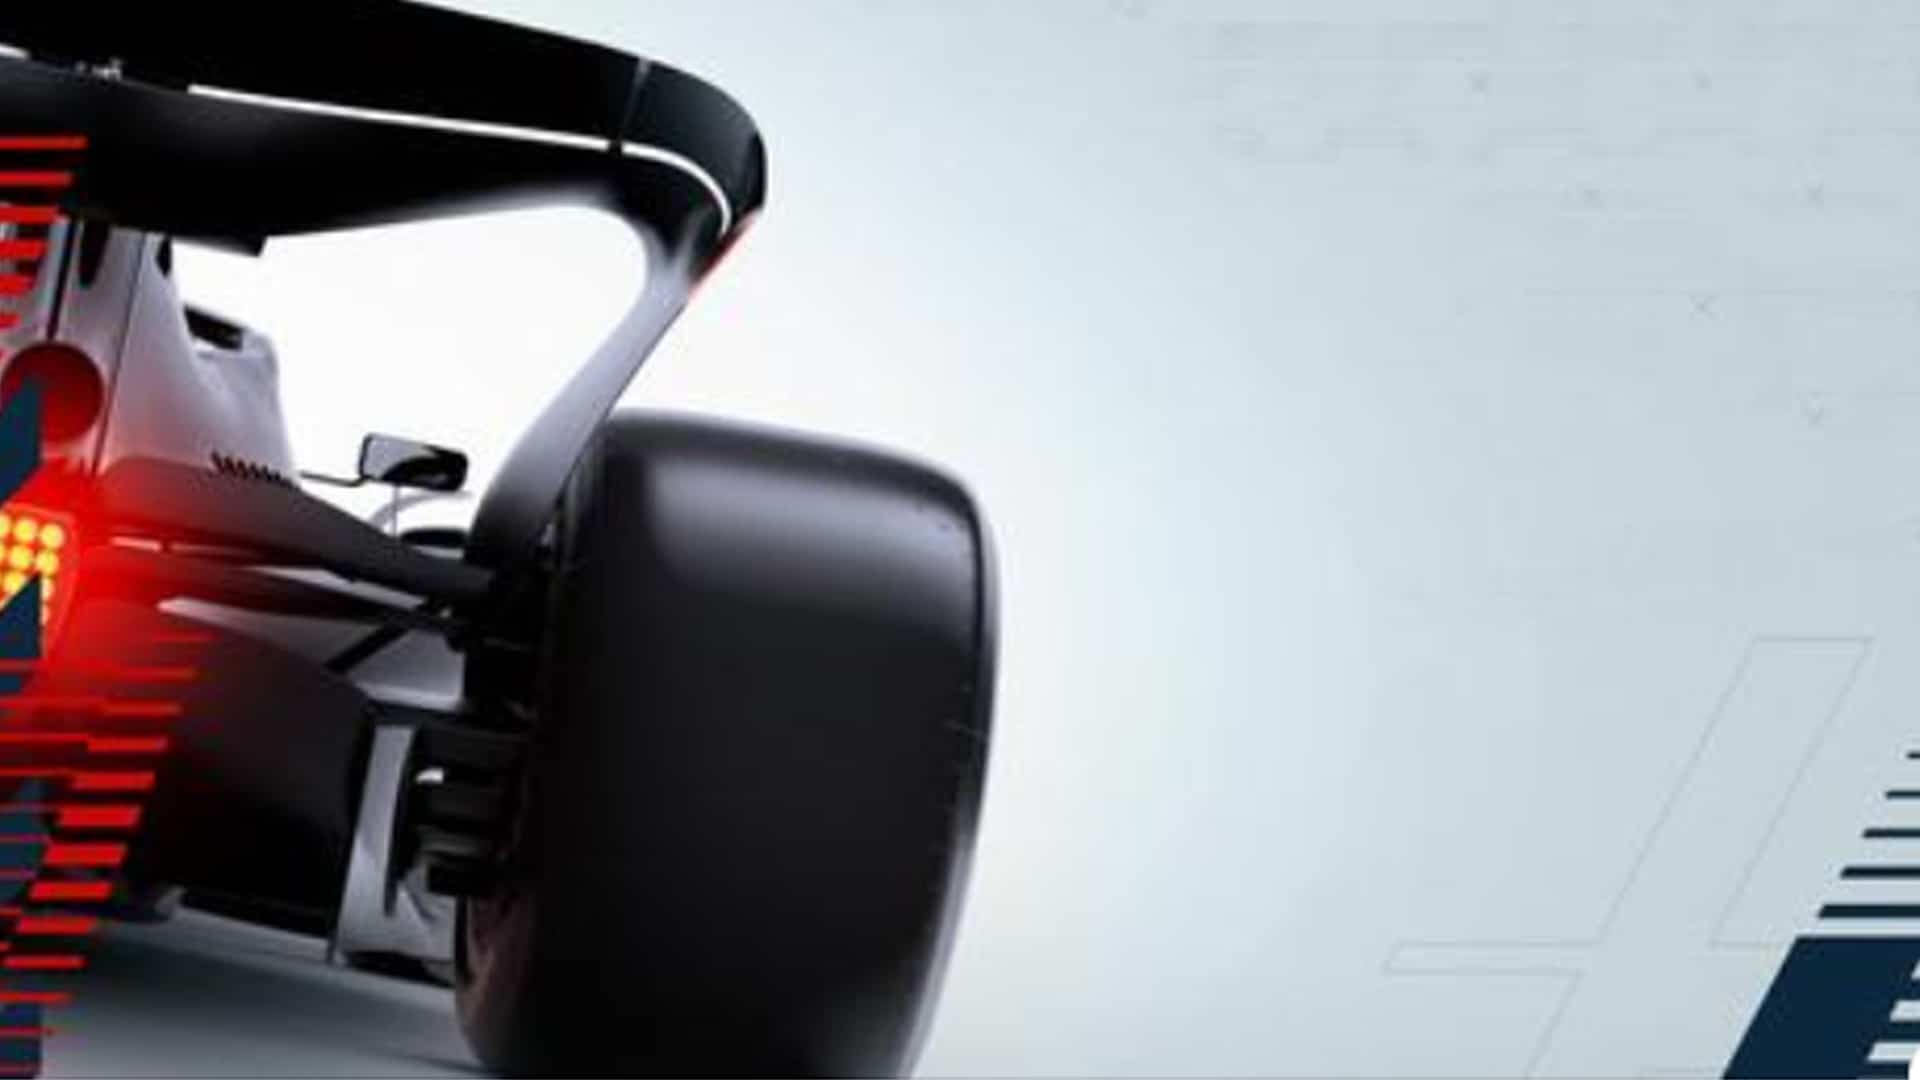 The next Formula 1 game, F1 22, will be revealed on 21st April